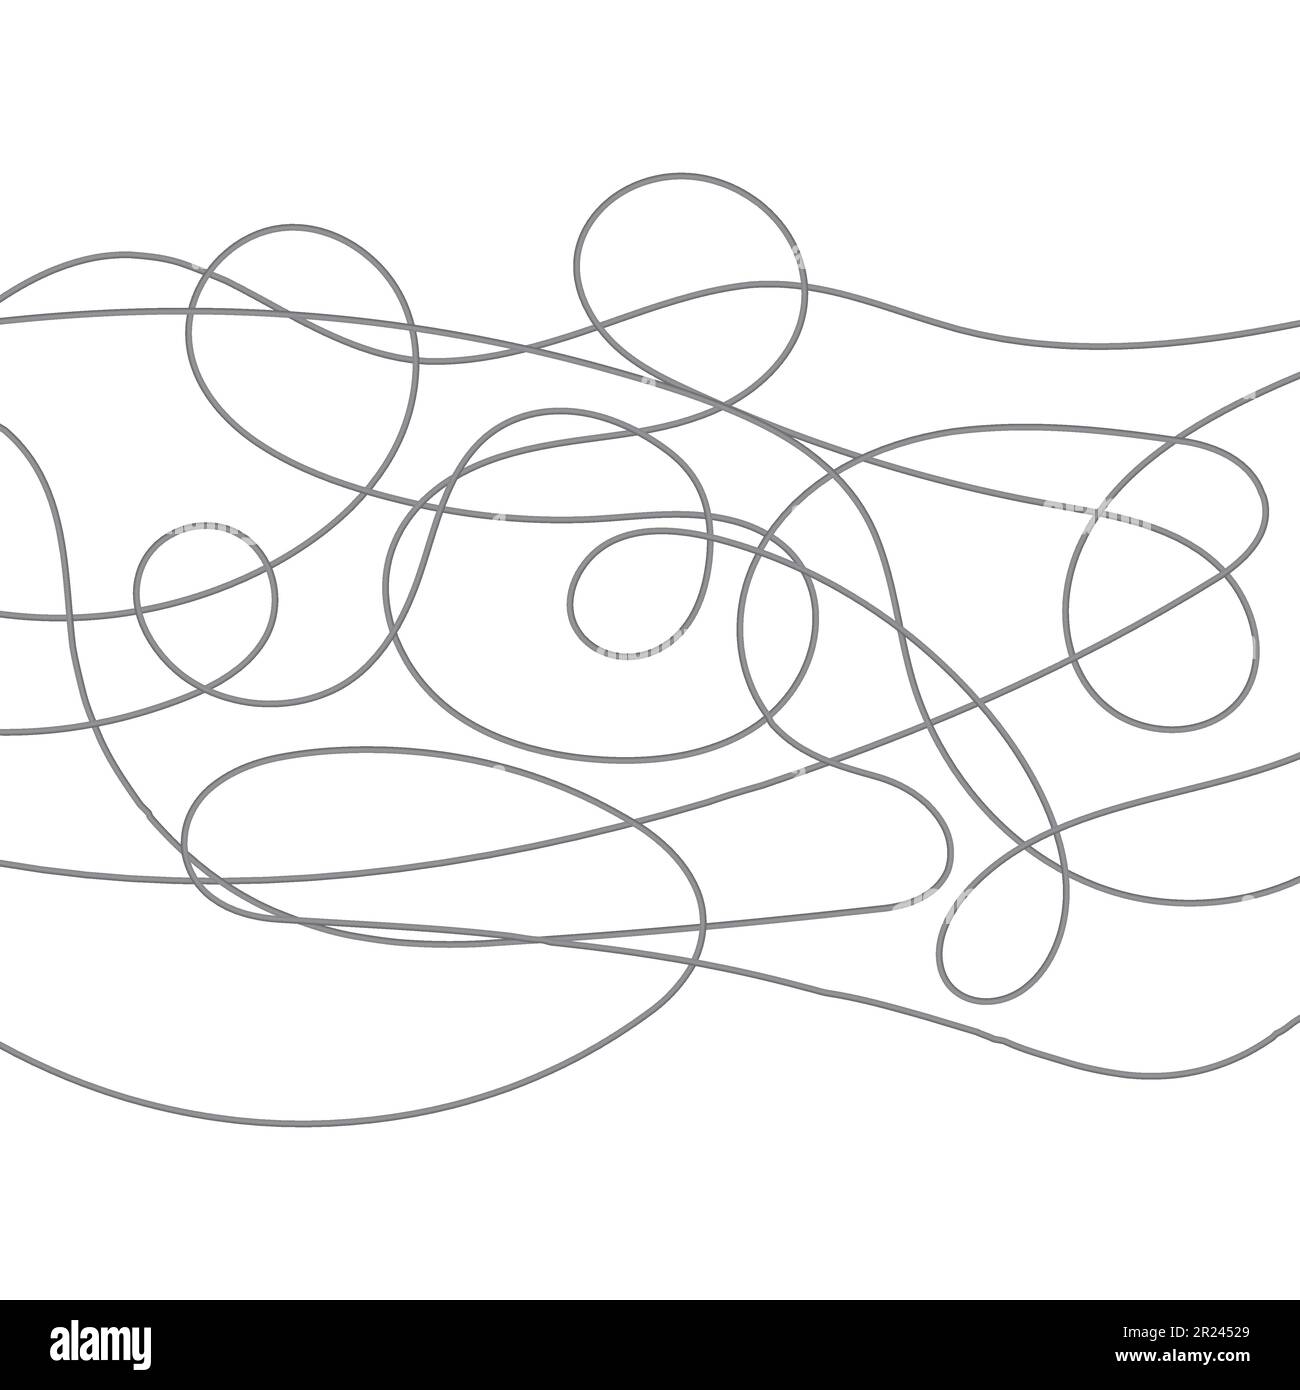 Abstract tangled texture. Random chaotic lines. Hand drawn object from the beginning and the end. Vector illustration. Stock Vector